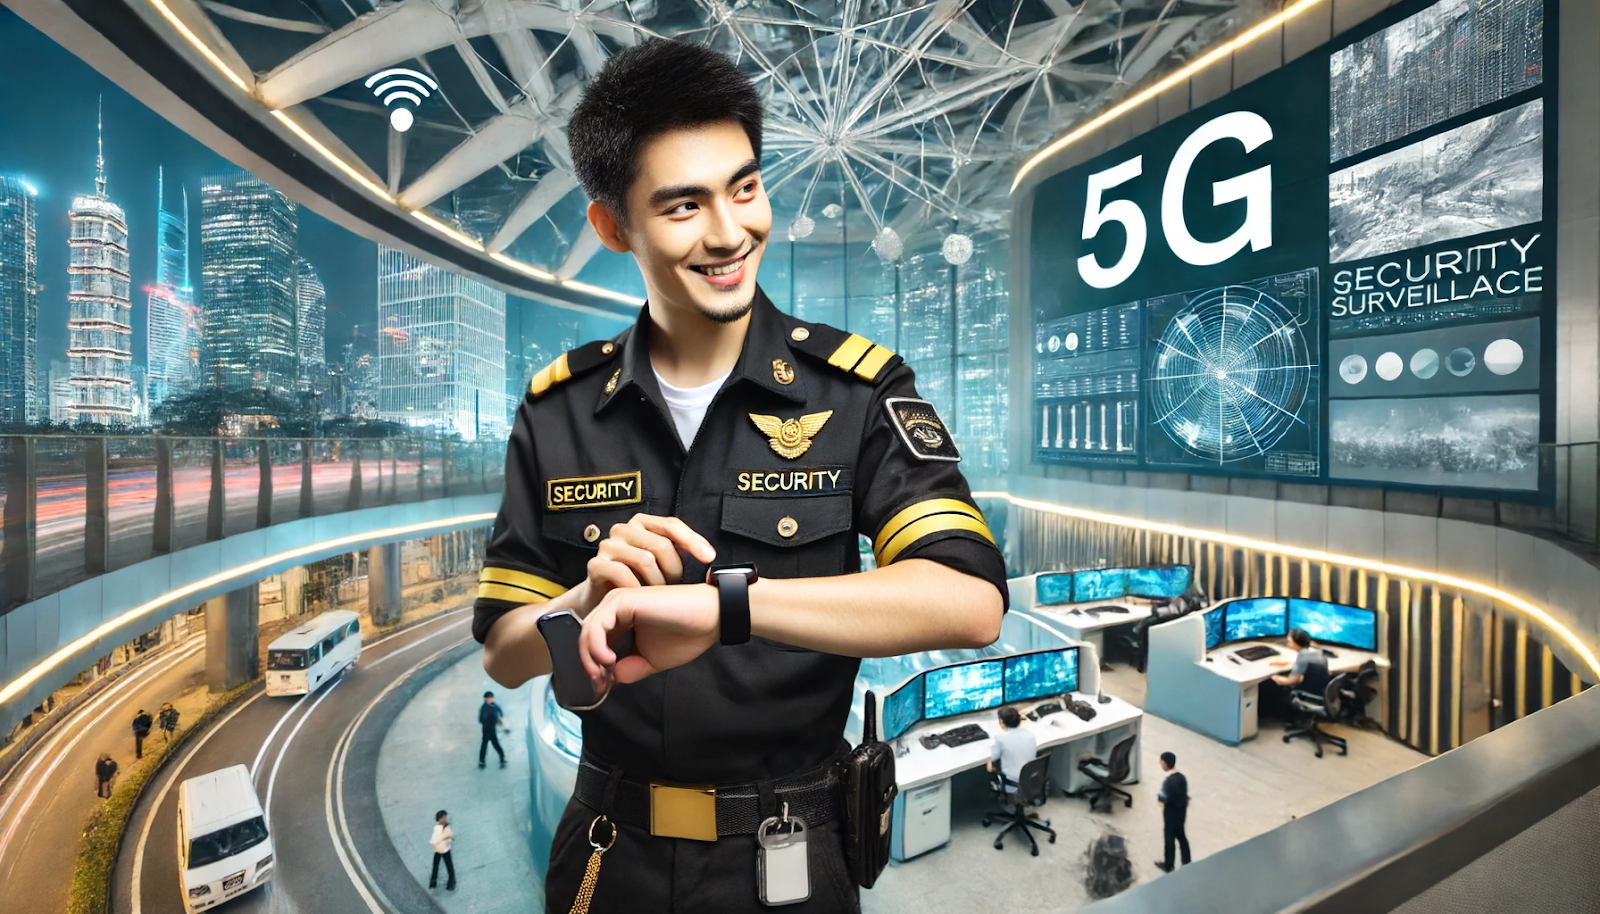 Cheerful security guard with black and gold uniform using 5G-enabled devices to enhance security operations.